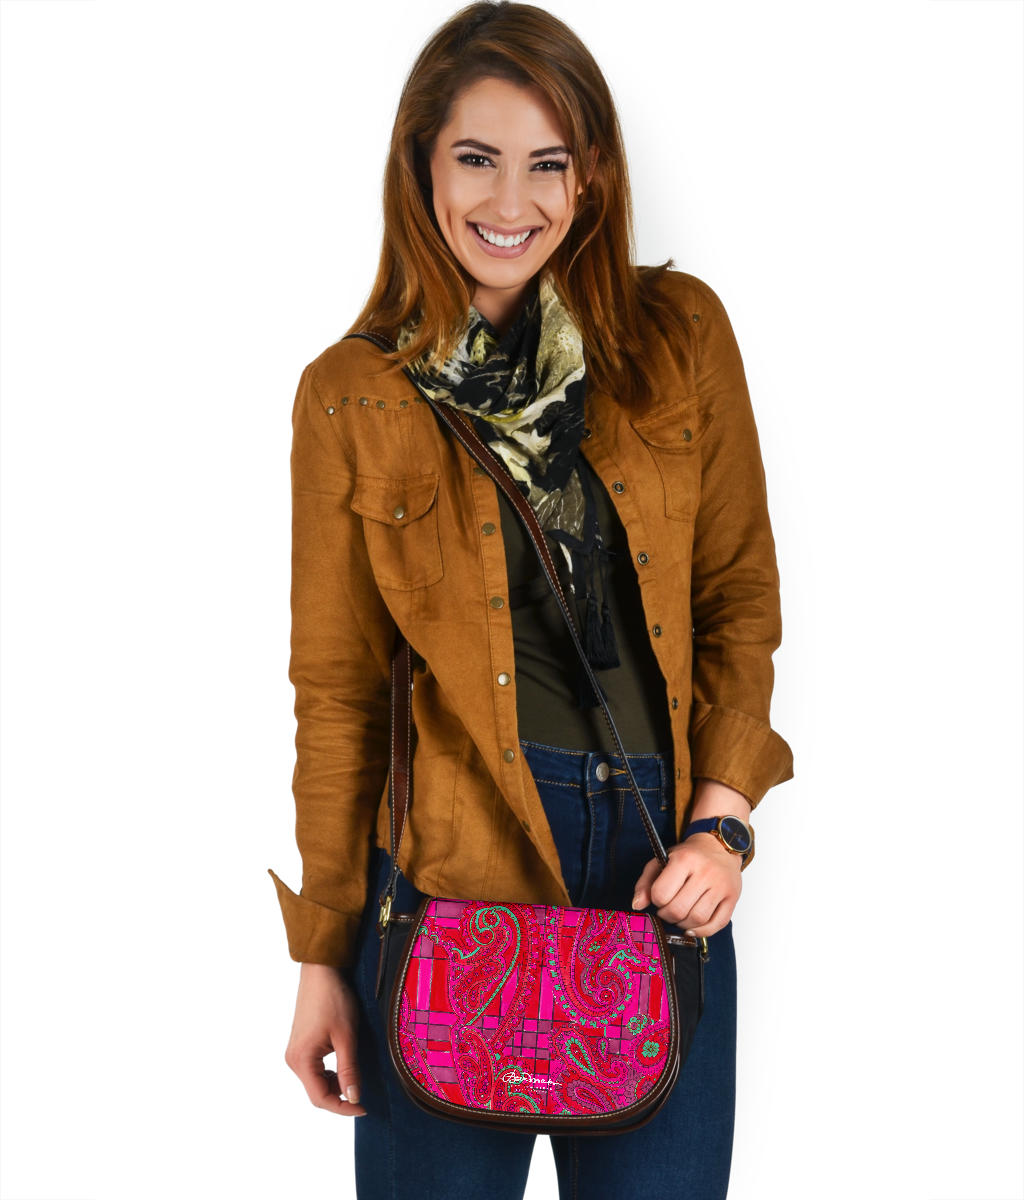 Bright Fuscia and Red Poppy Paisley on Plaid Saddle Shoulder Bag